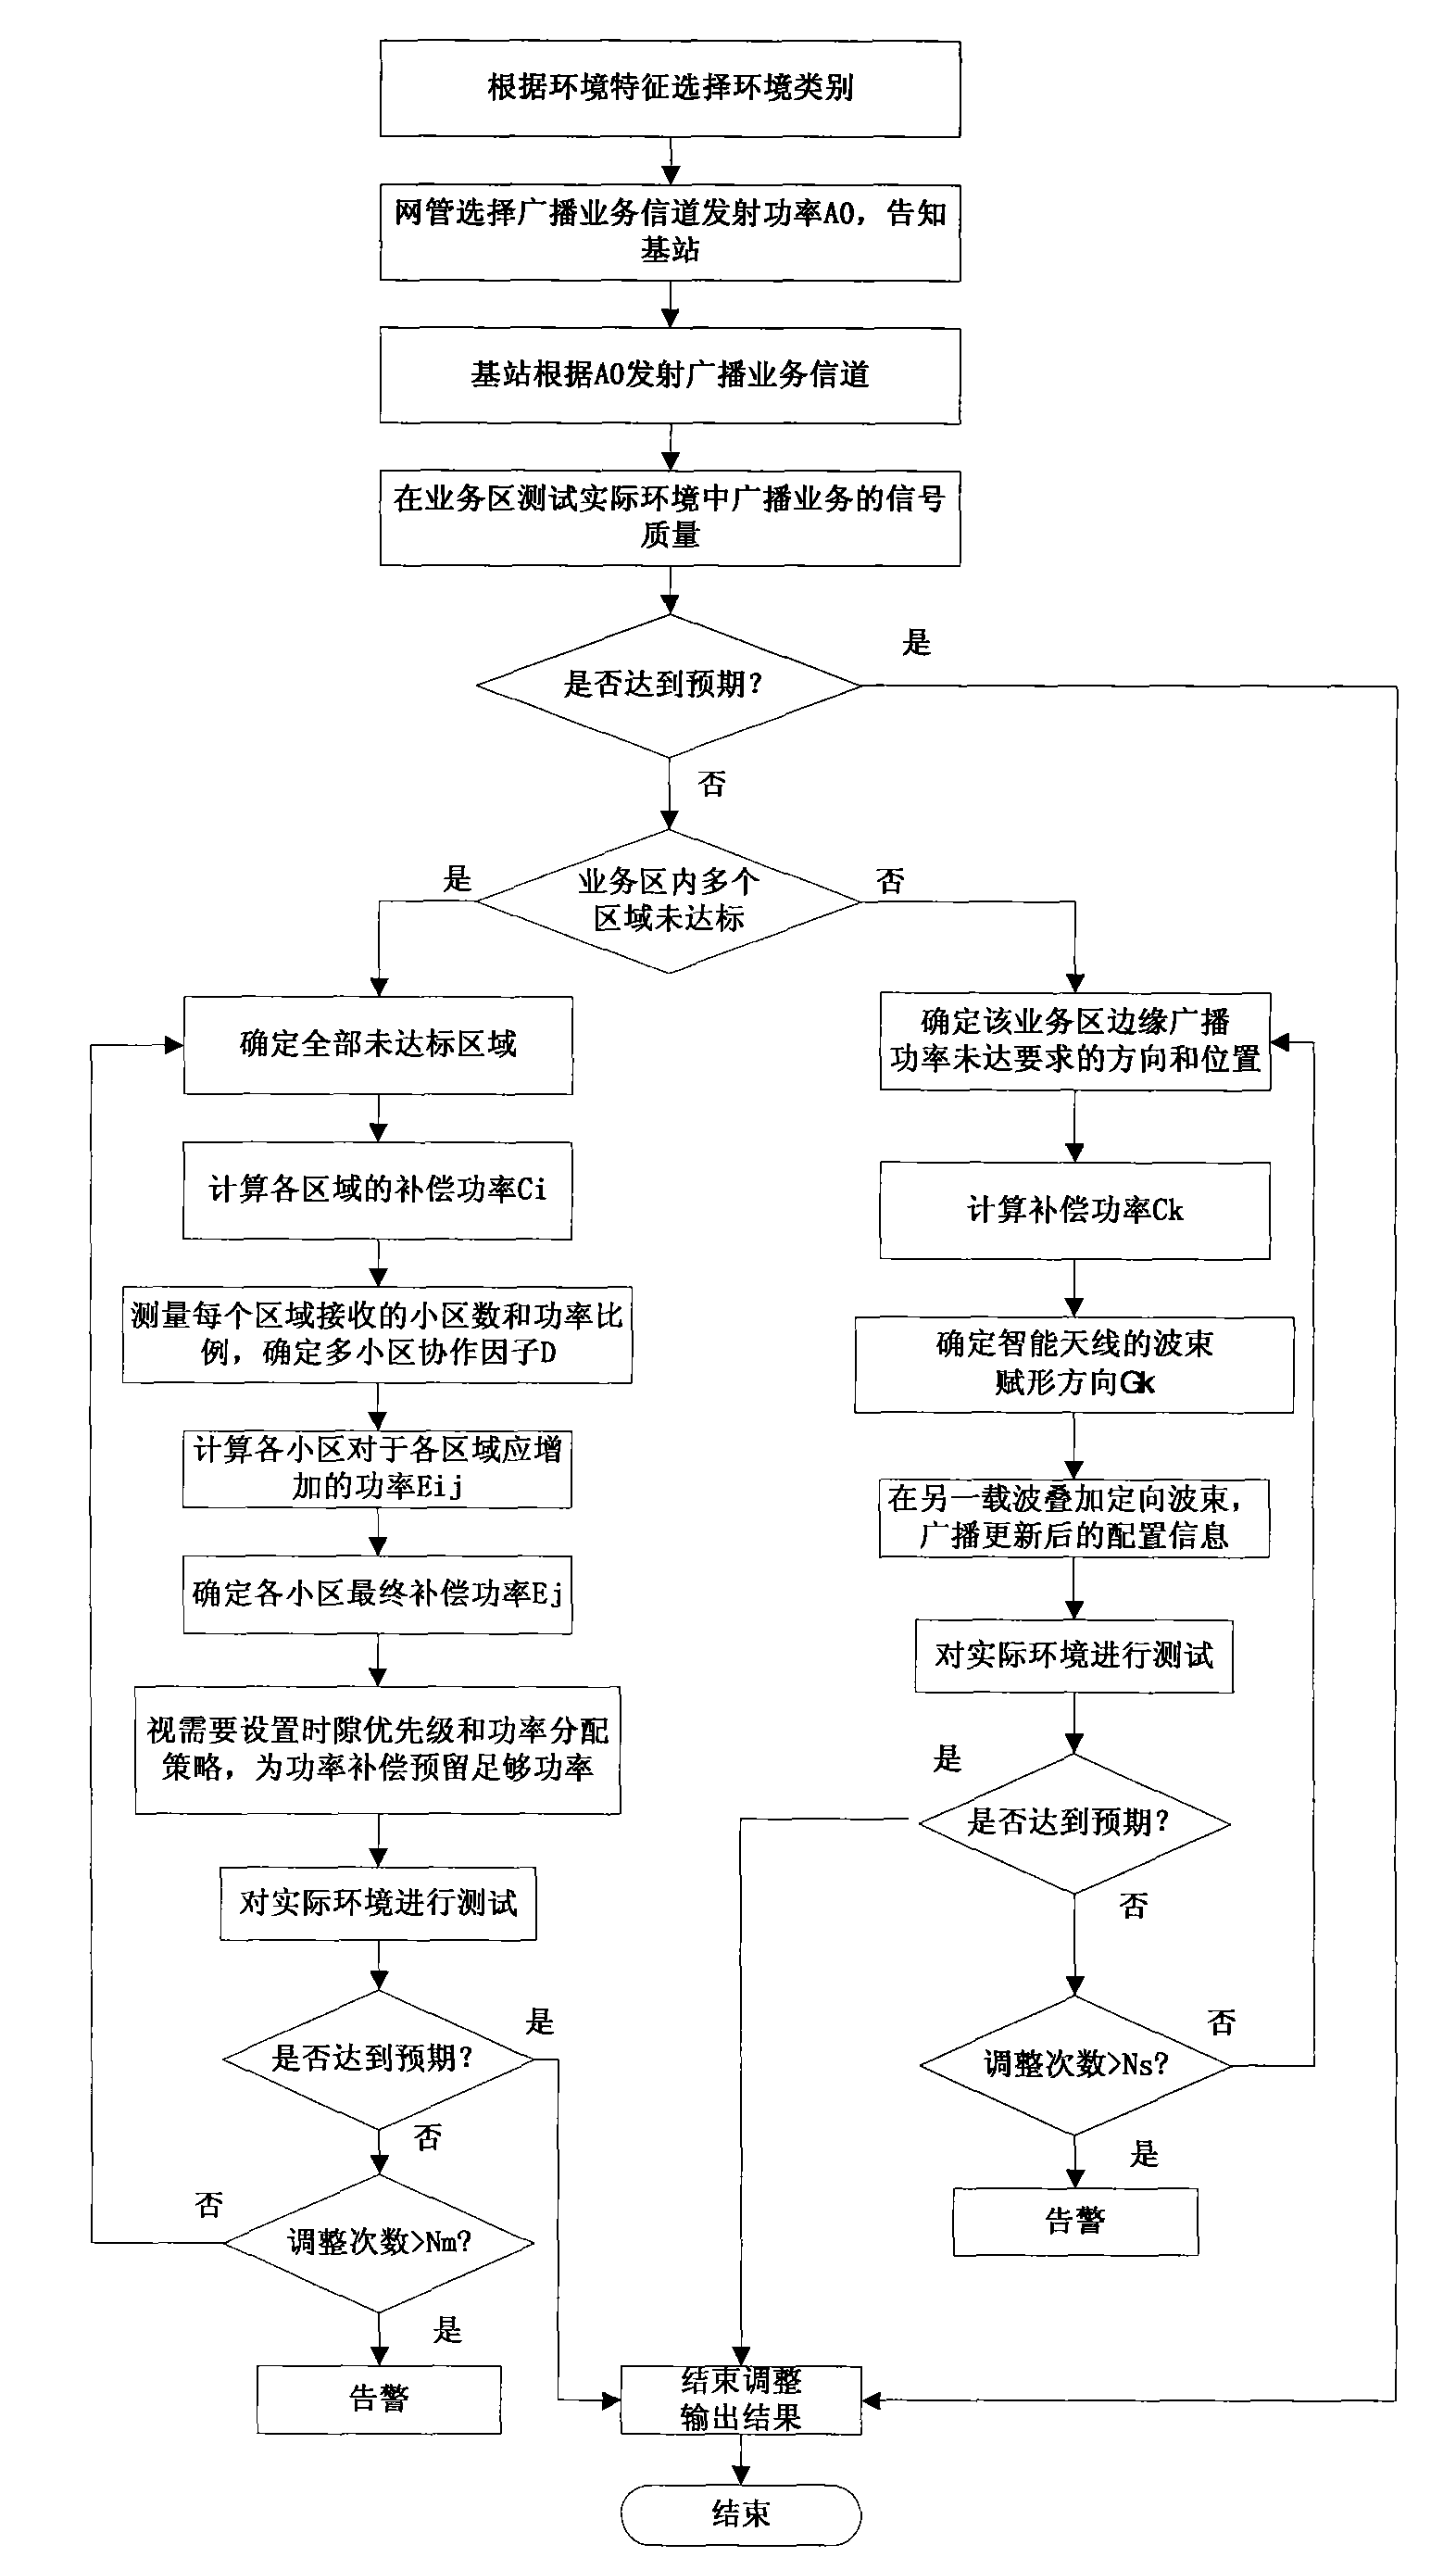 Method for improving quality of broadcasting service in mobile communication network